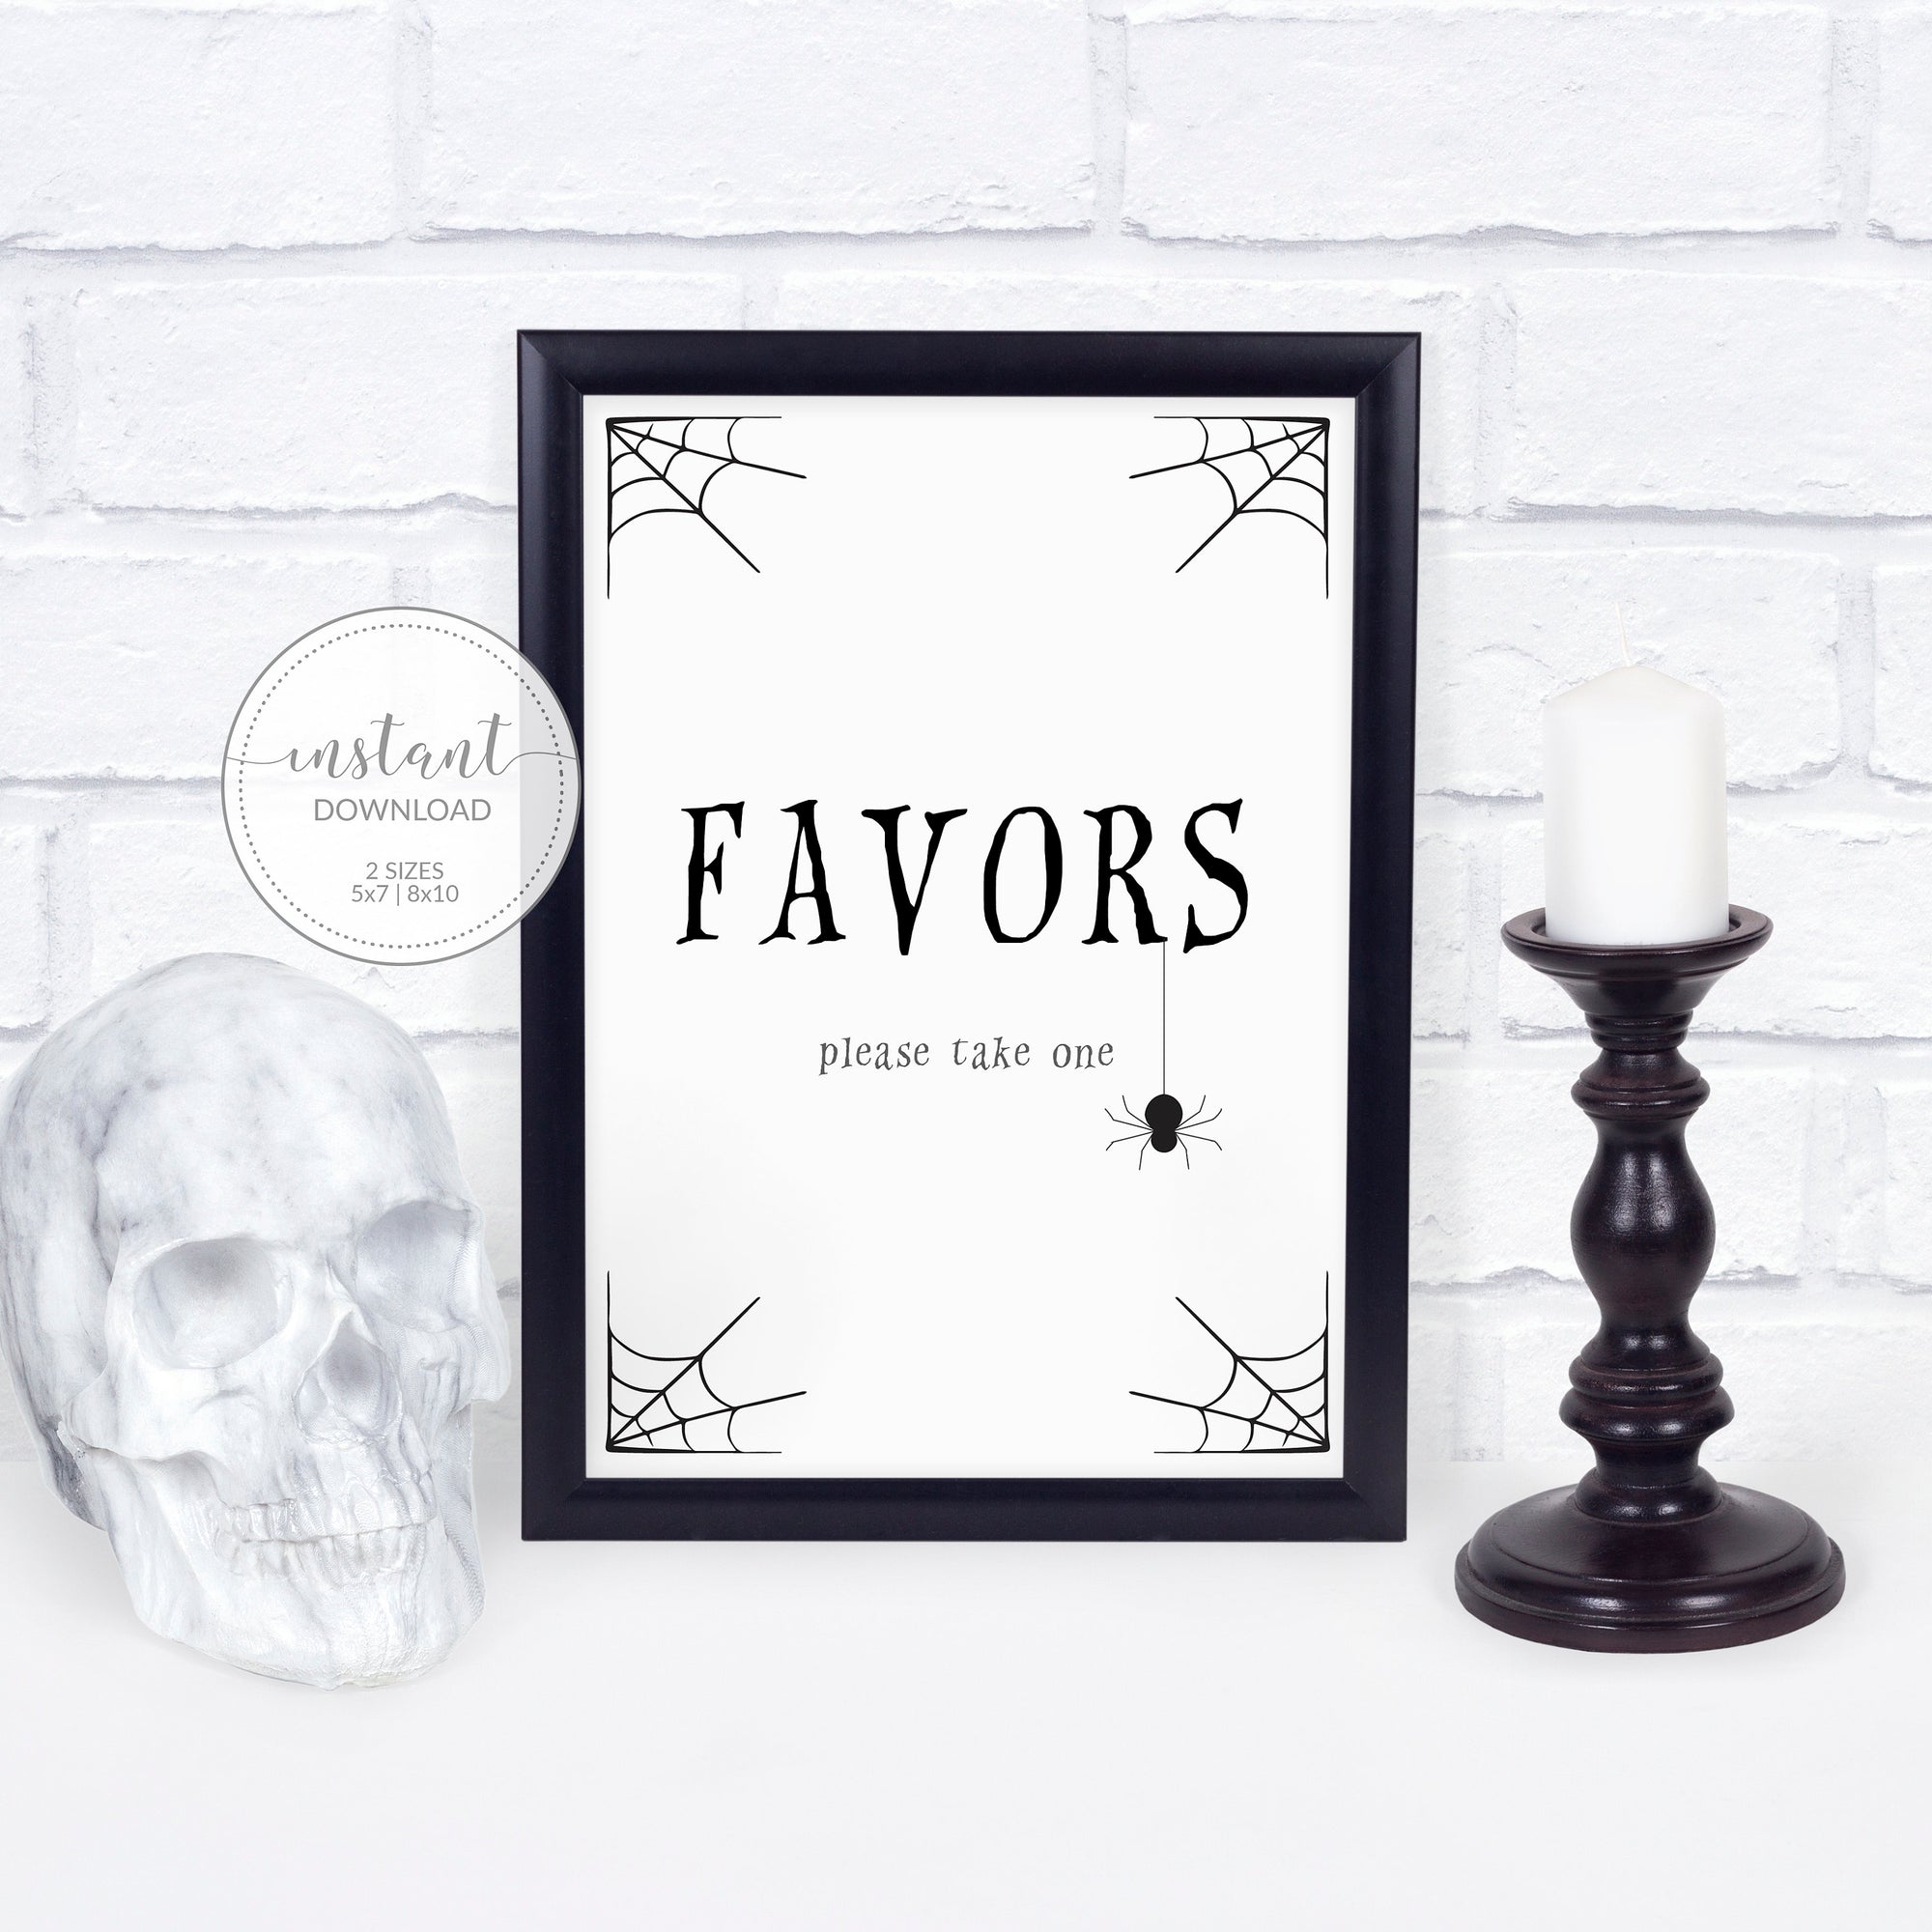 Halloween Party Favors Sign INSTANT DOWNLOAD, Halloween Party Decorations, Halloween Party Supplies, Printable Halloween Sign - EDS100 - @PlumPolkaDot 